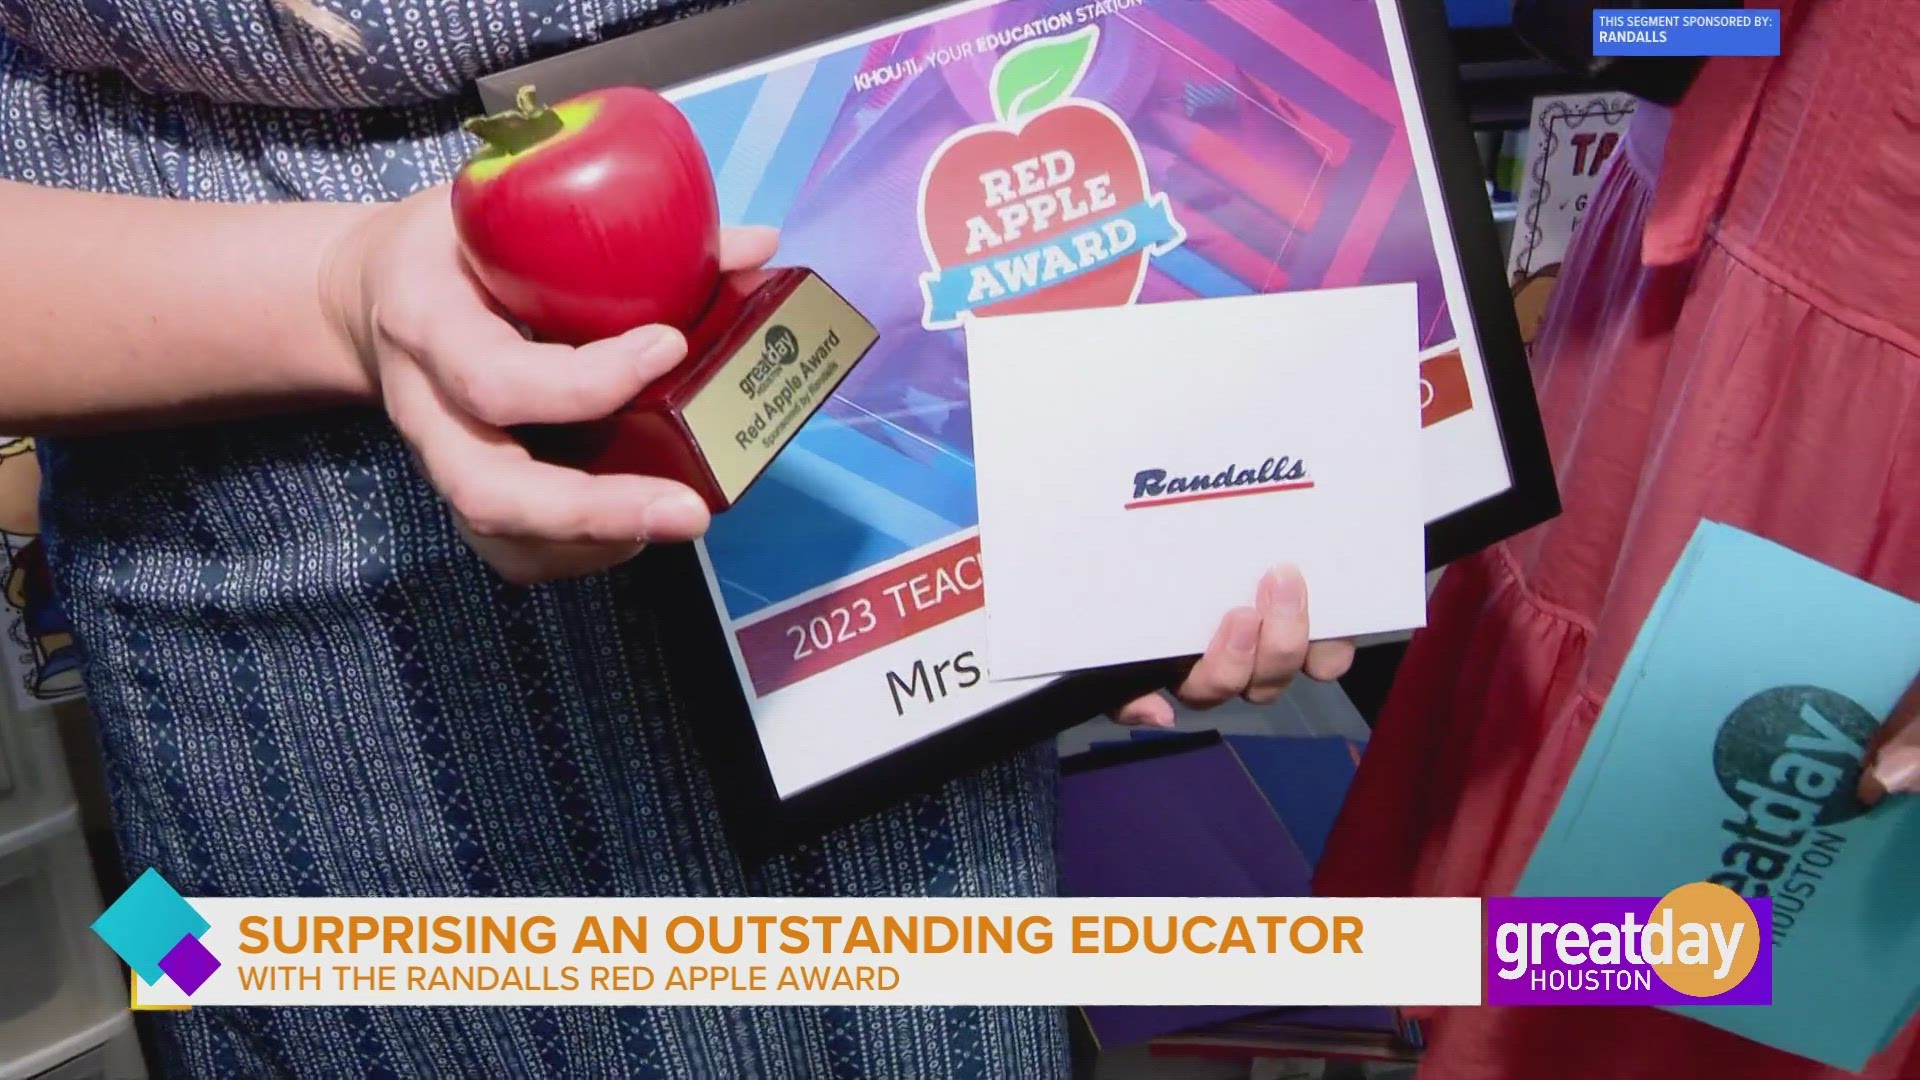 Randalls Red Apple Award is gifted to one standout educator in the Greater Houston Area each month within the school year.